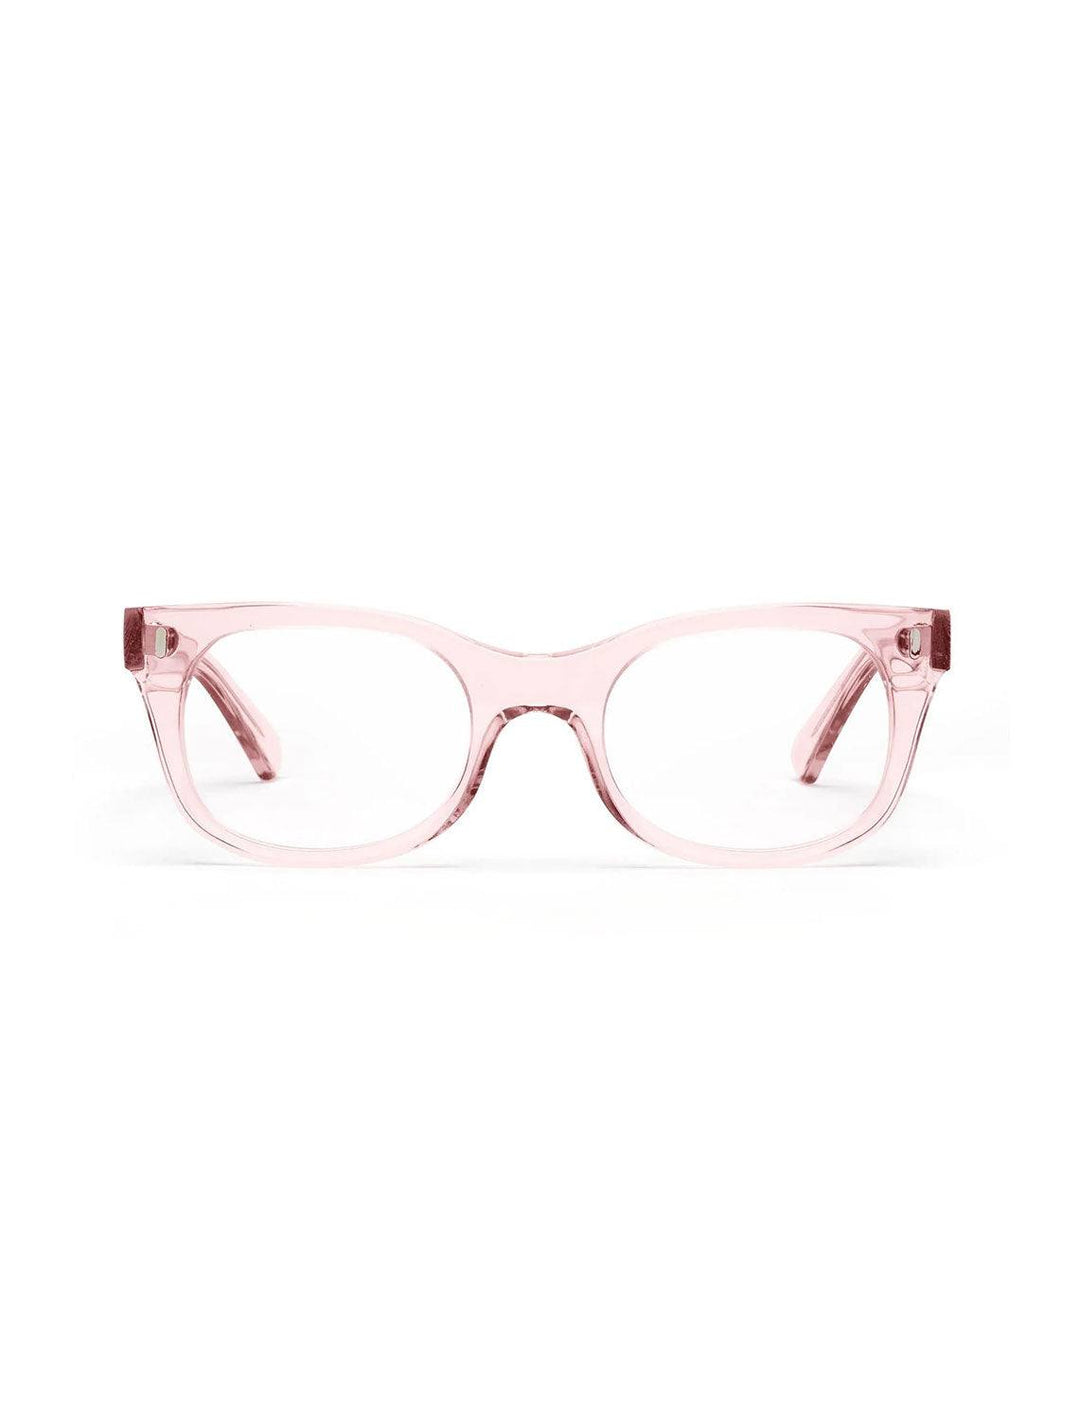 Front view of Caddis' bixby frame in polished pink.